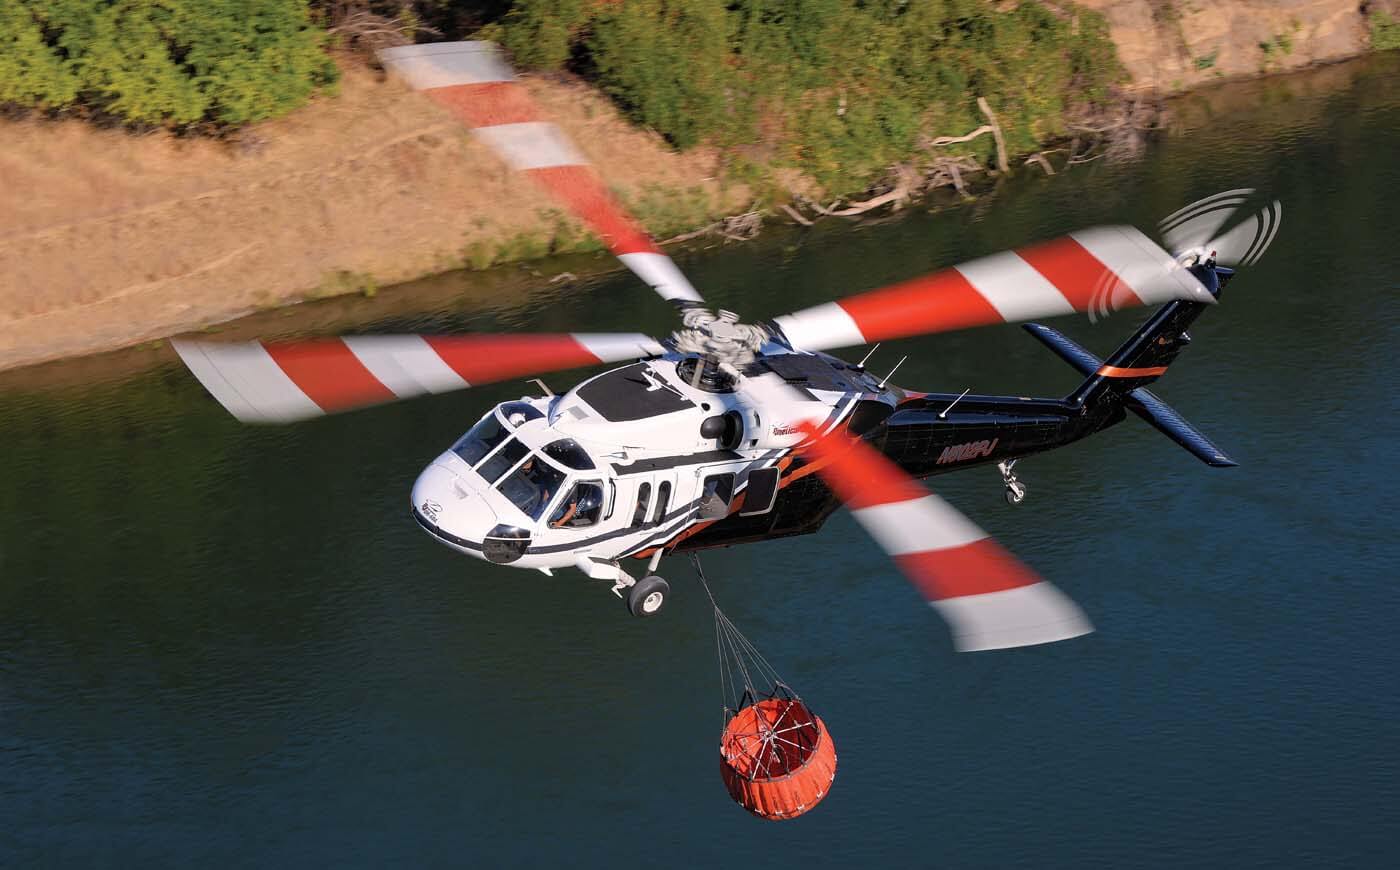 A PJ Helicopters Sikorsky UH-60 Black Hawk prepares to collect water during a firefighting operation. The company is one of several to take advantage of the recent availability of Black Hawks in the civilian marketplace.